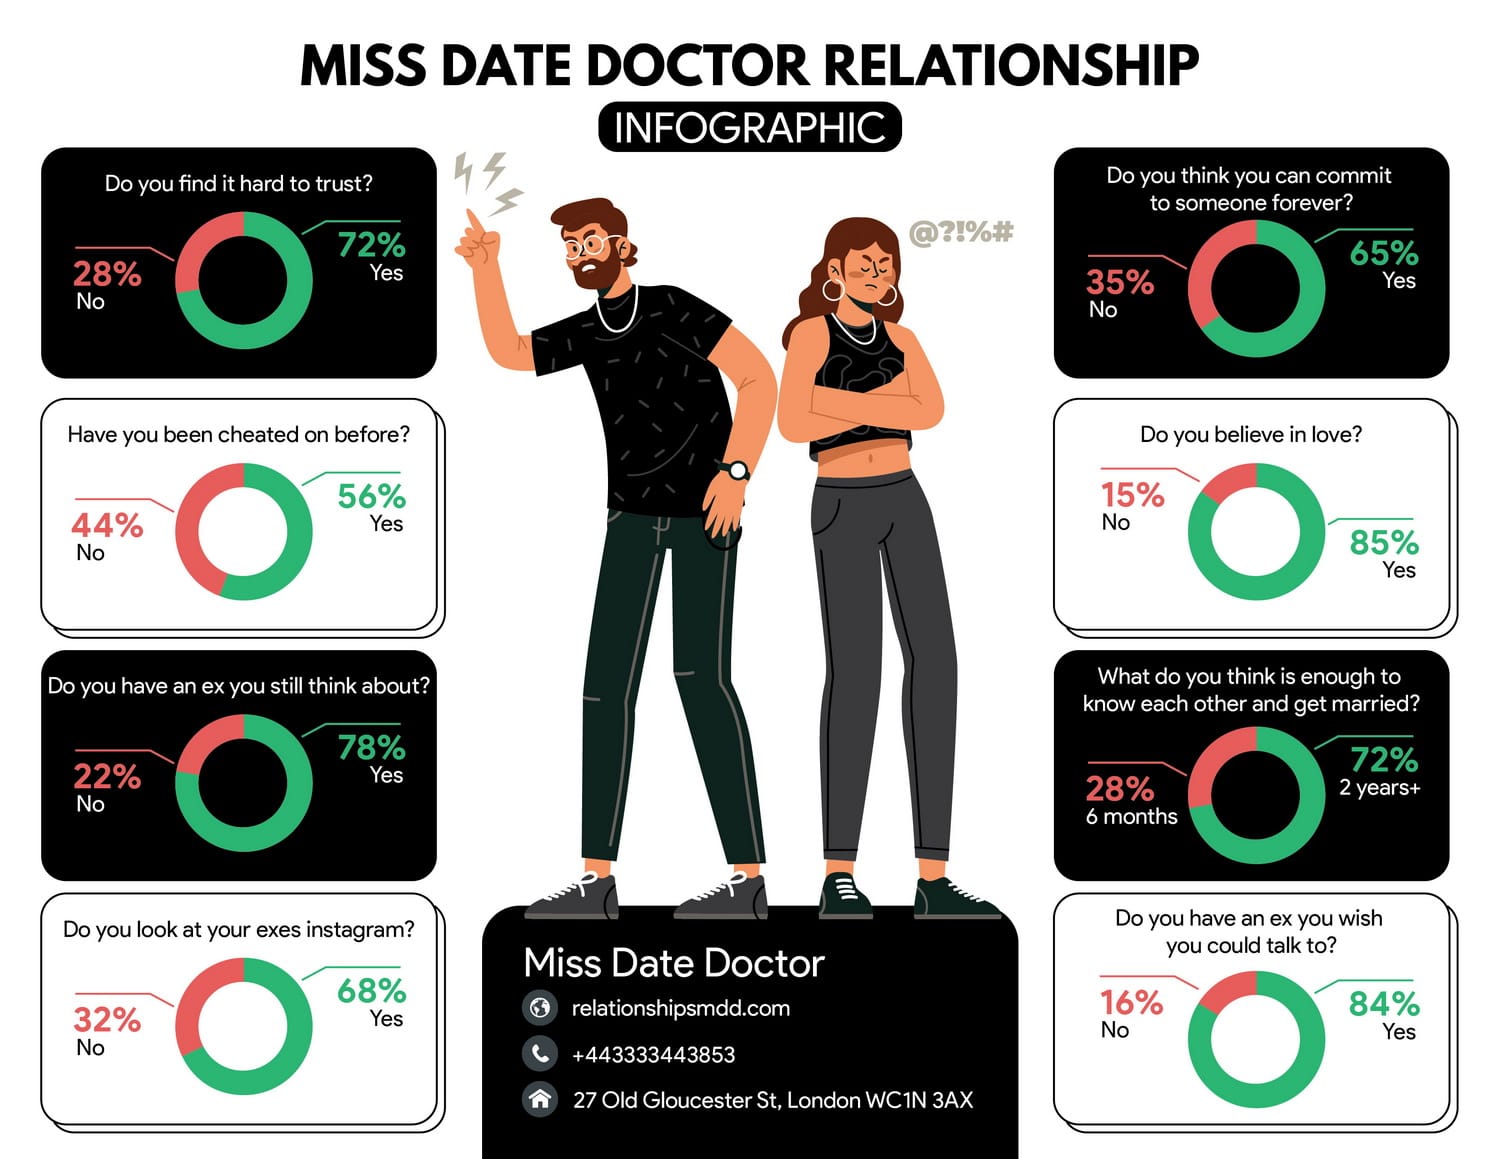 MISS DATE DOCTOR RELATIONSHIP INFOGRAPHIC